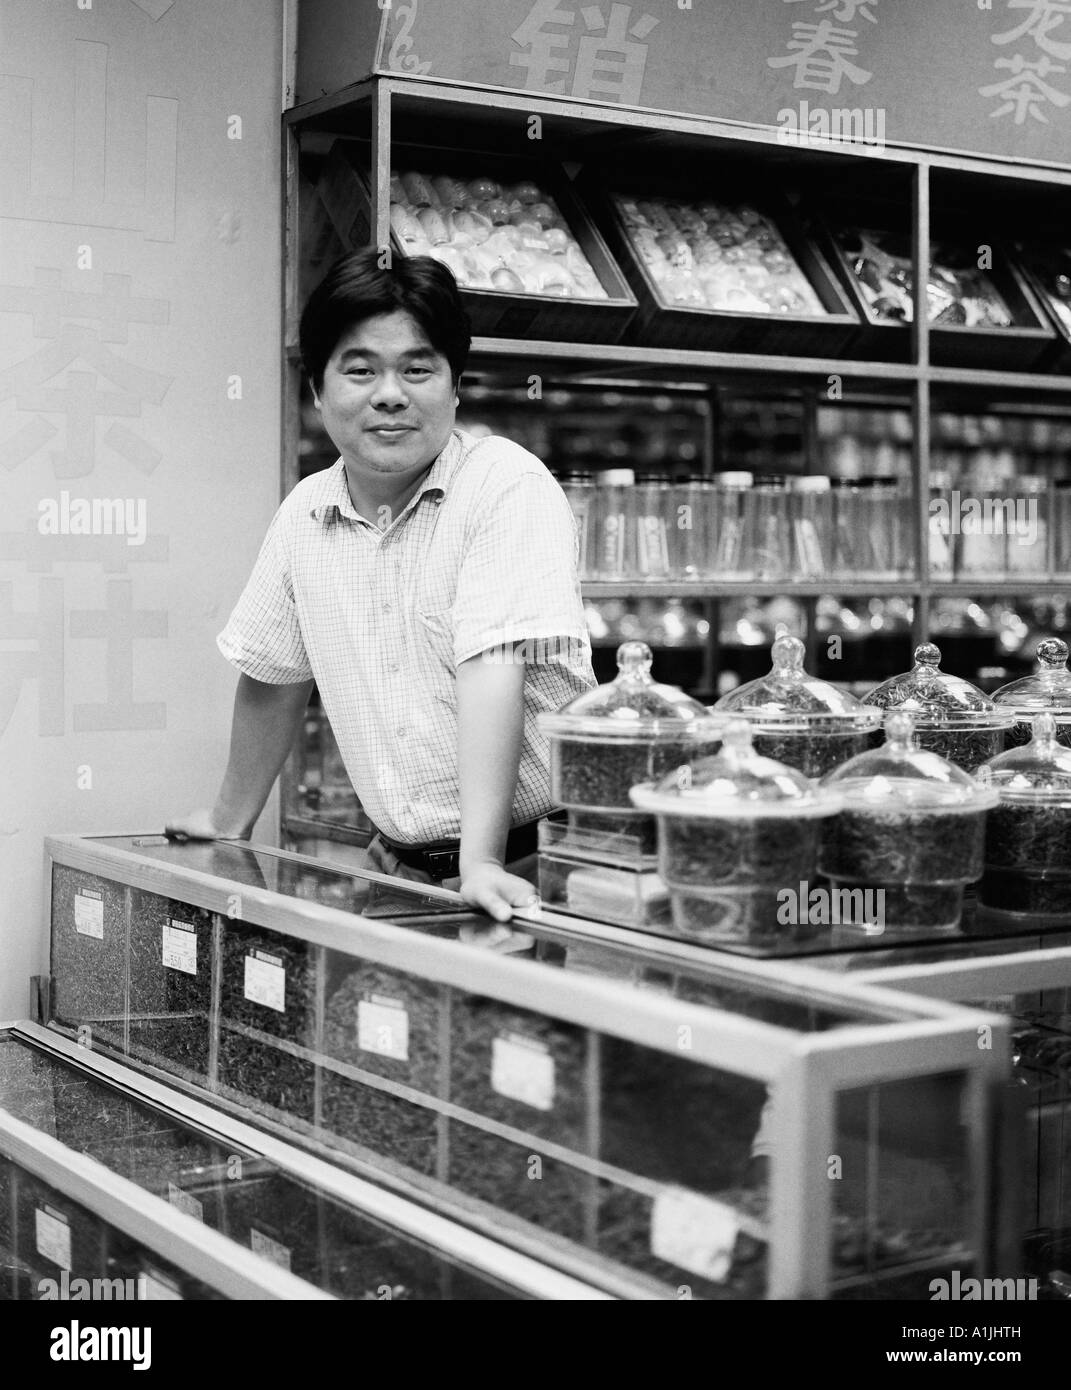 Portrait of a shopkeeper standing at the checkout counter Stock Photo